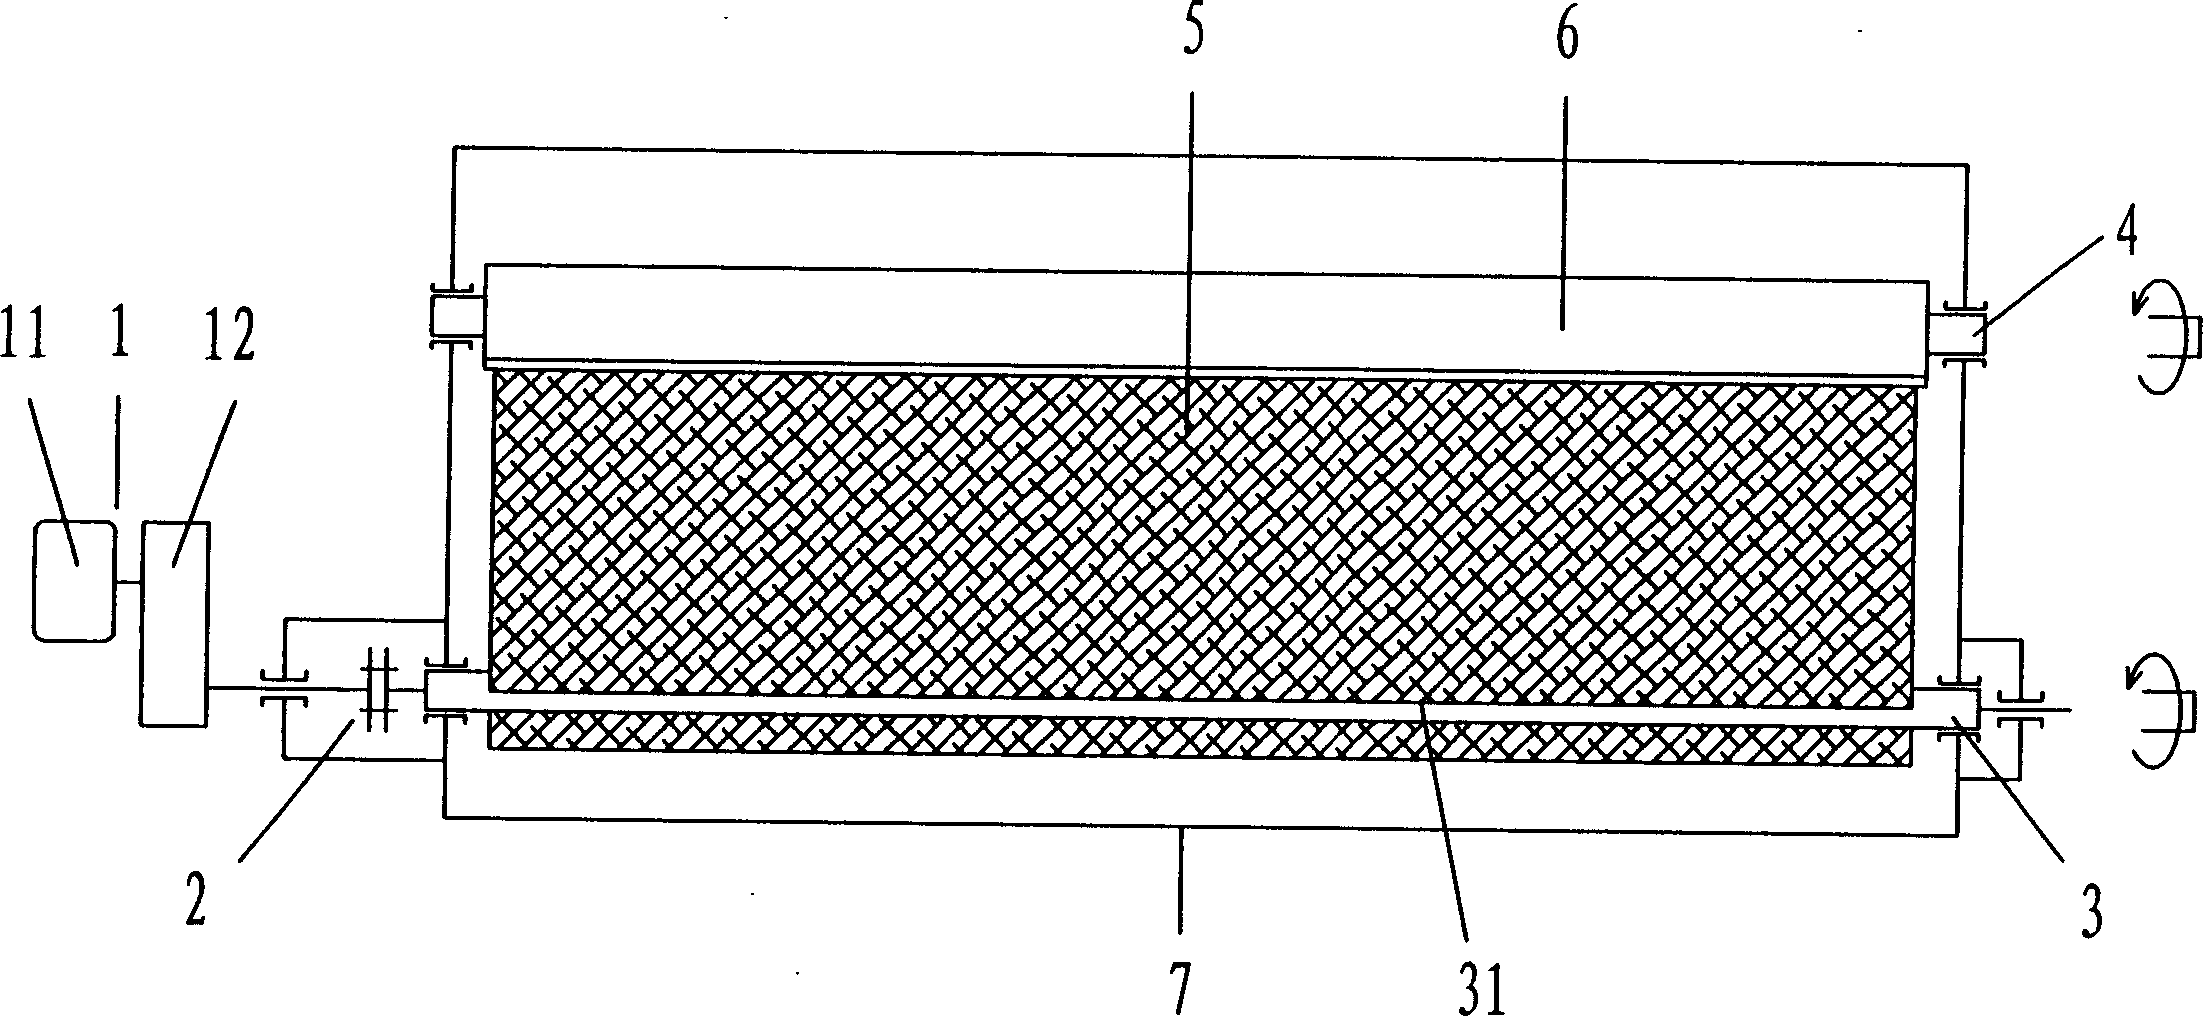 Filtering apparatus utilizing wetting filtering net for air sterilization and filtering